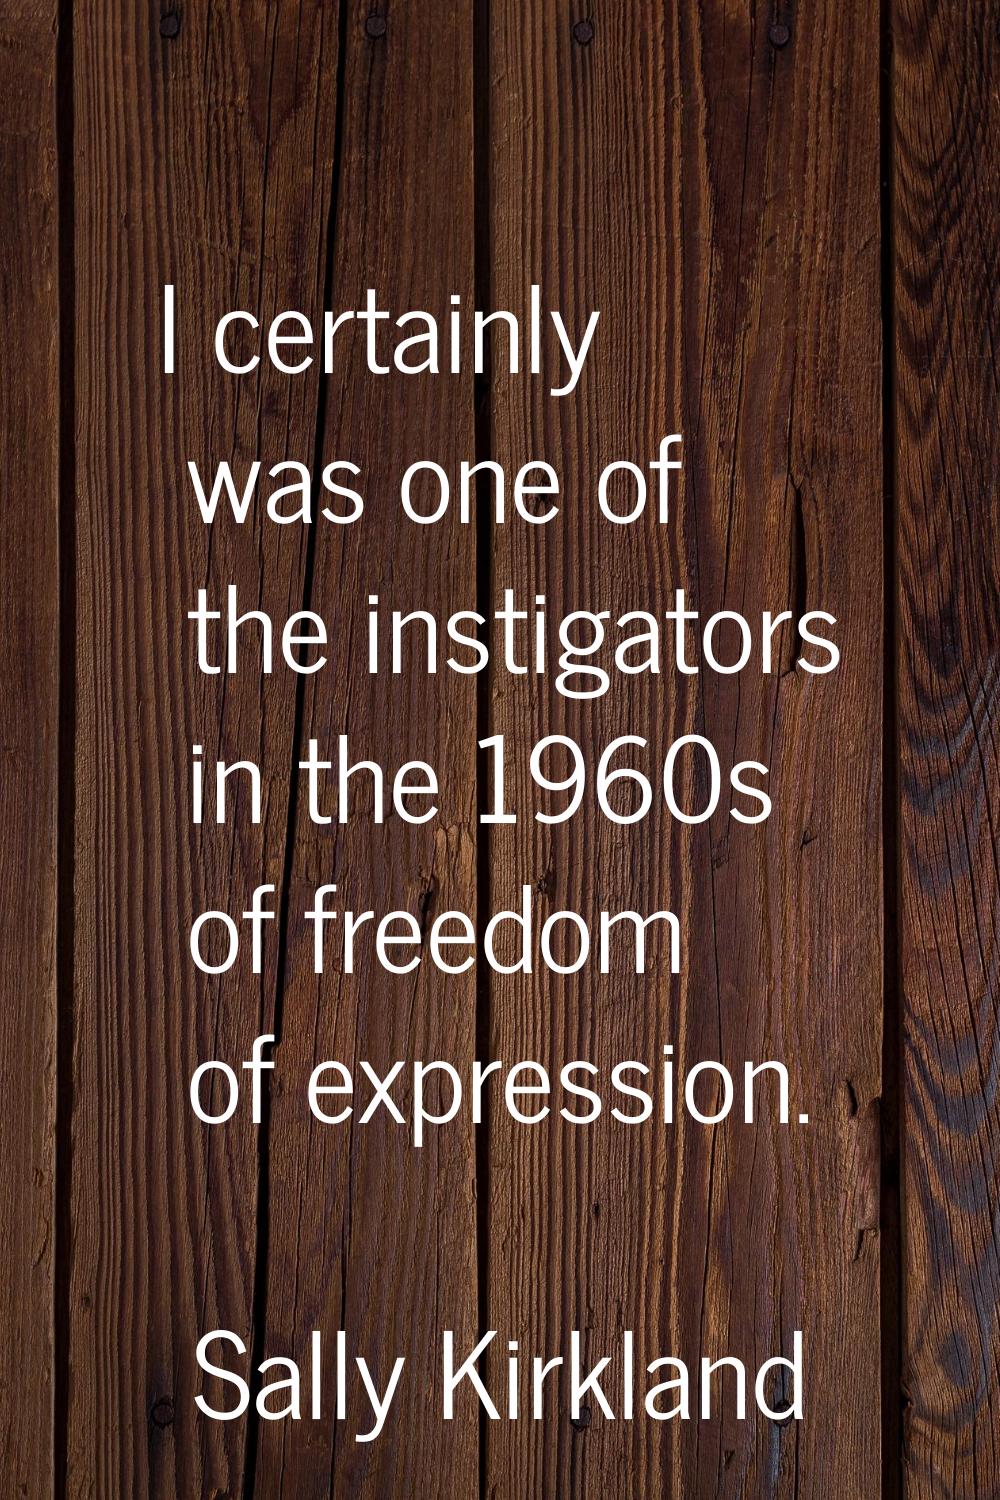 I certainly was one of the instigators in the 1960s of freedom of expression.